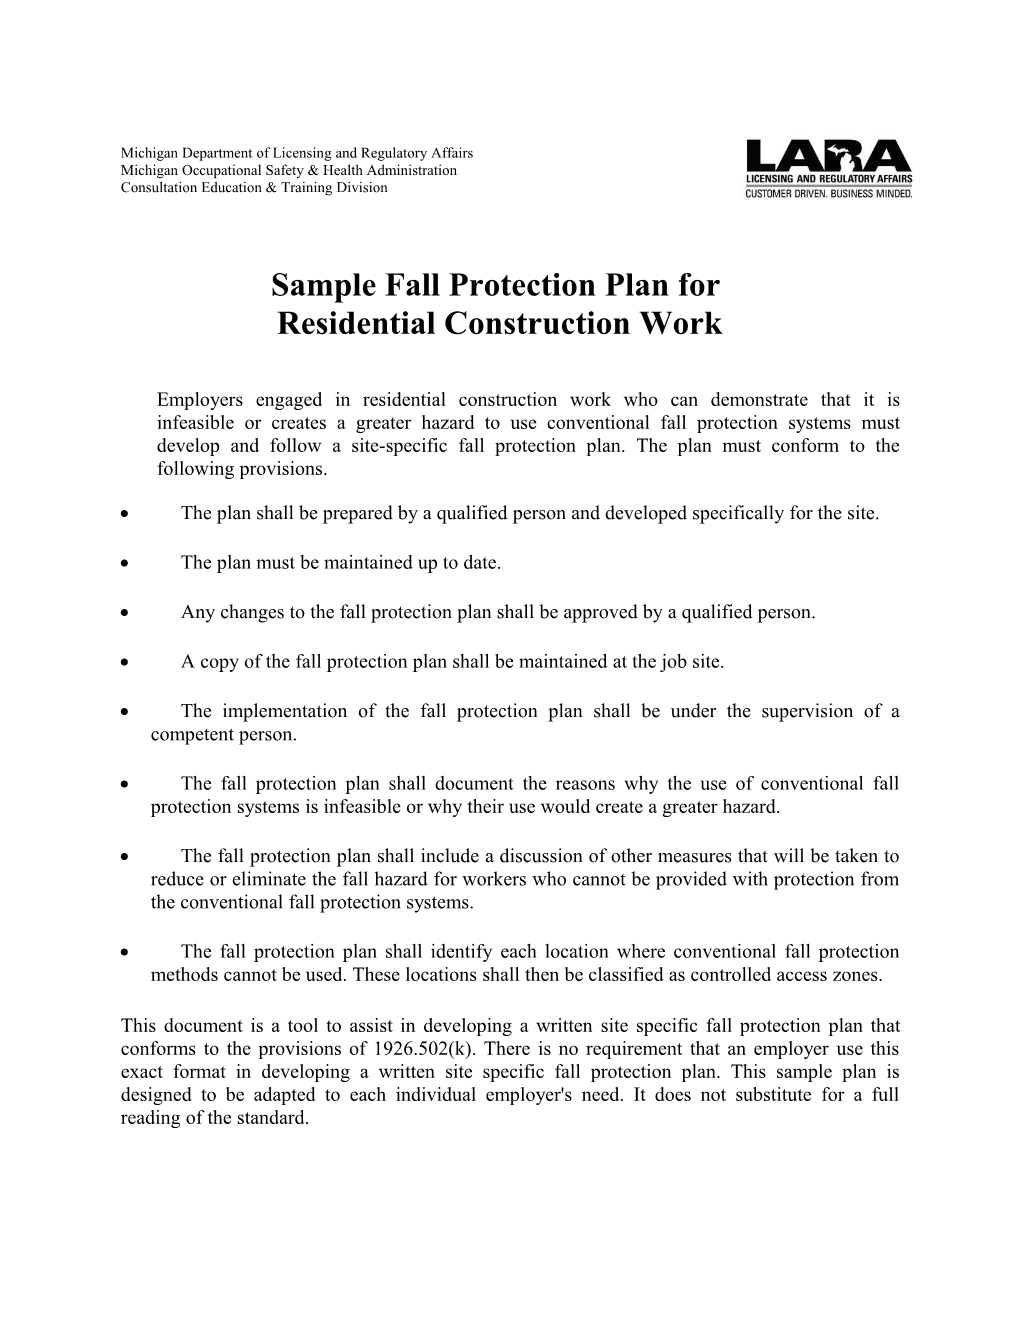 Sample Fall Protection Plan for Residential Construction Work